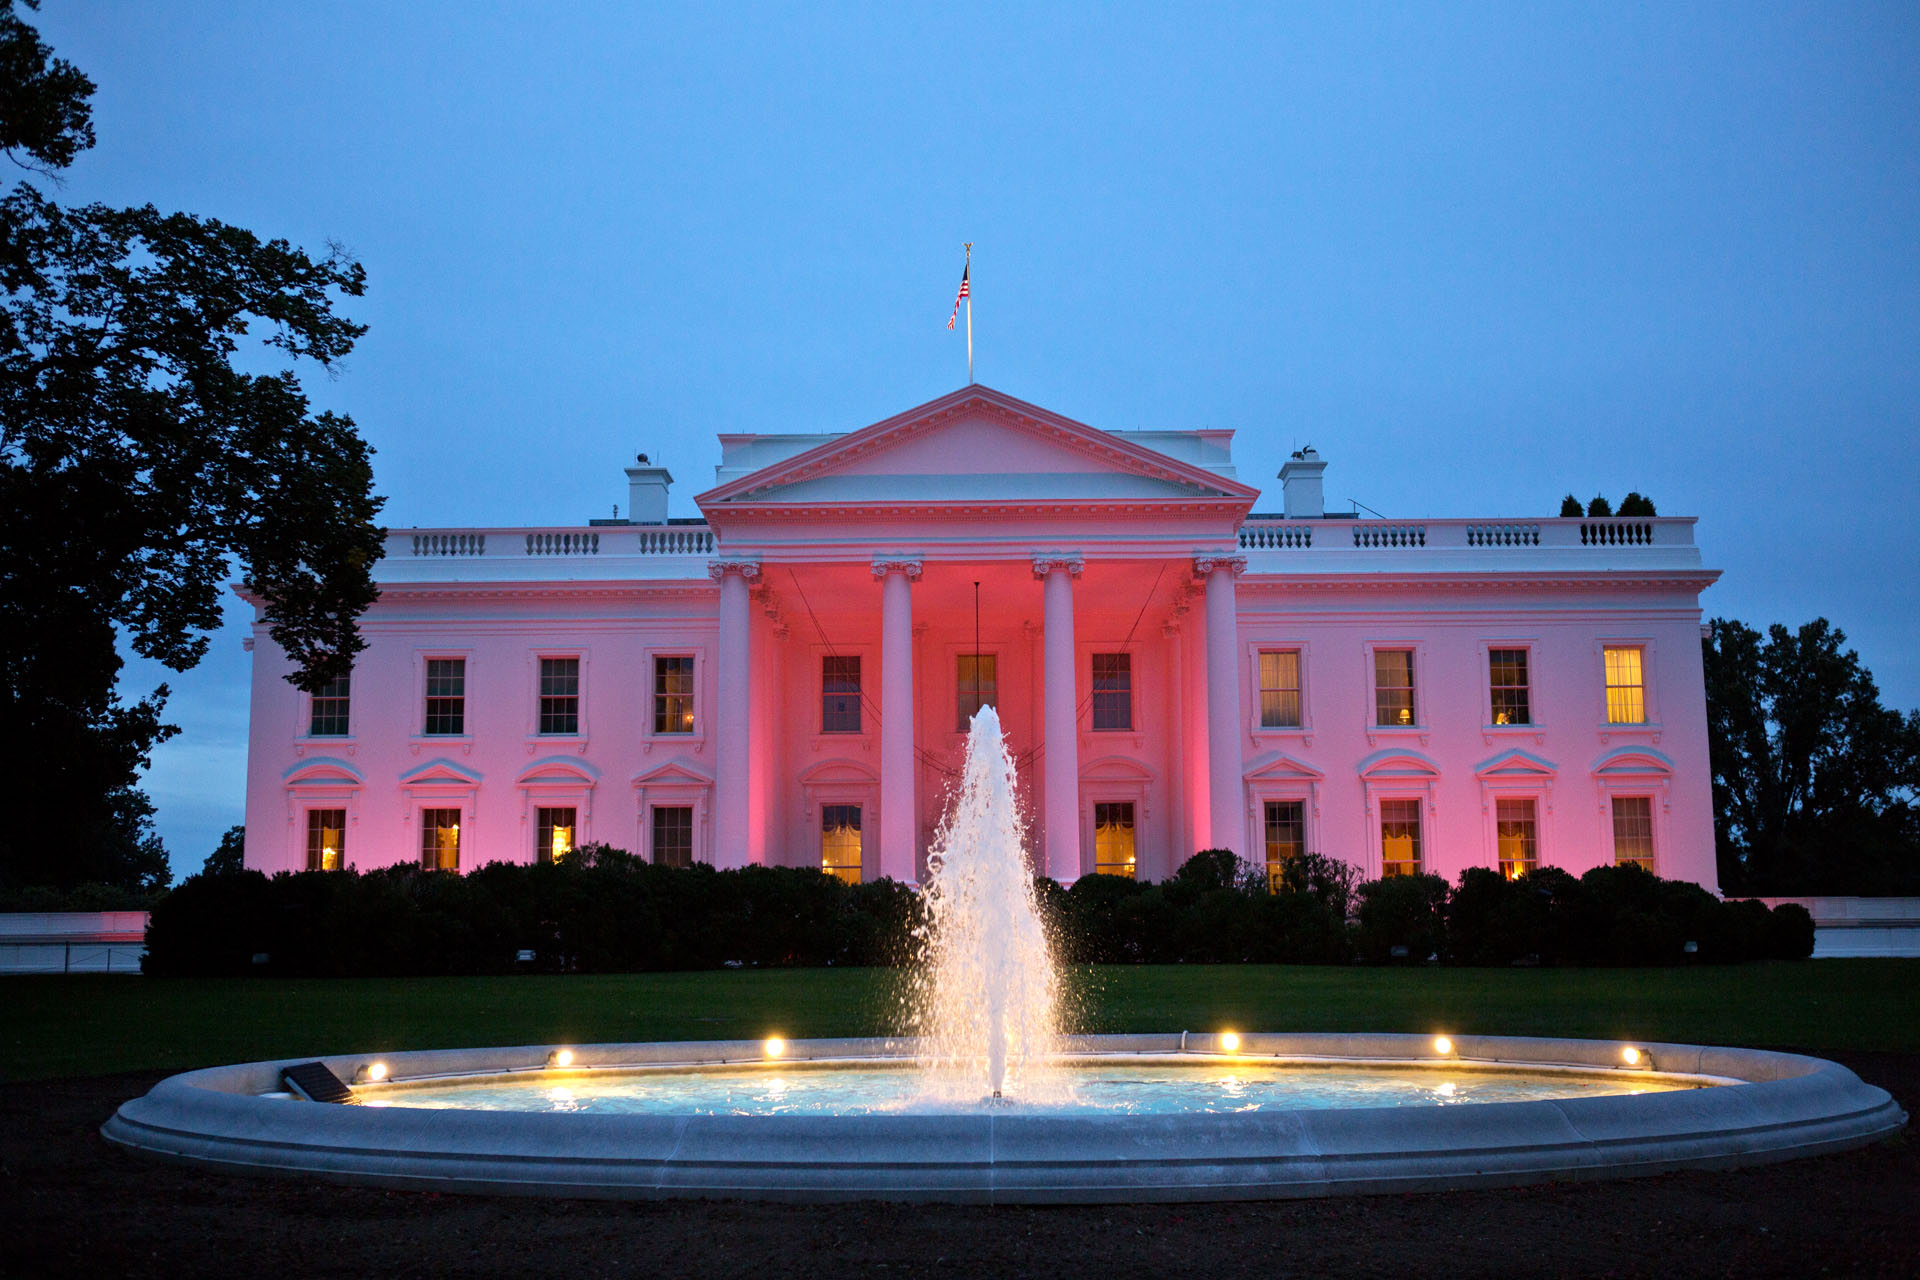 The North Portico exterior of the White House is illuminated pink